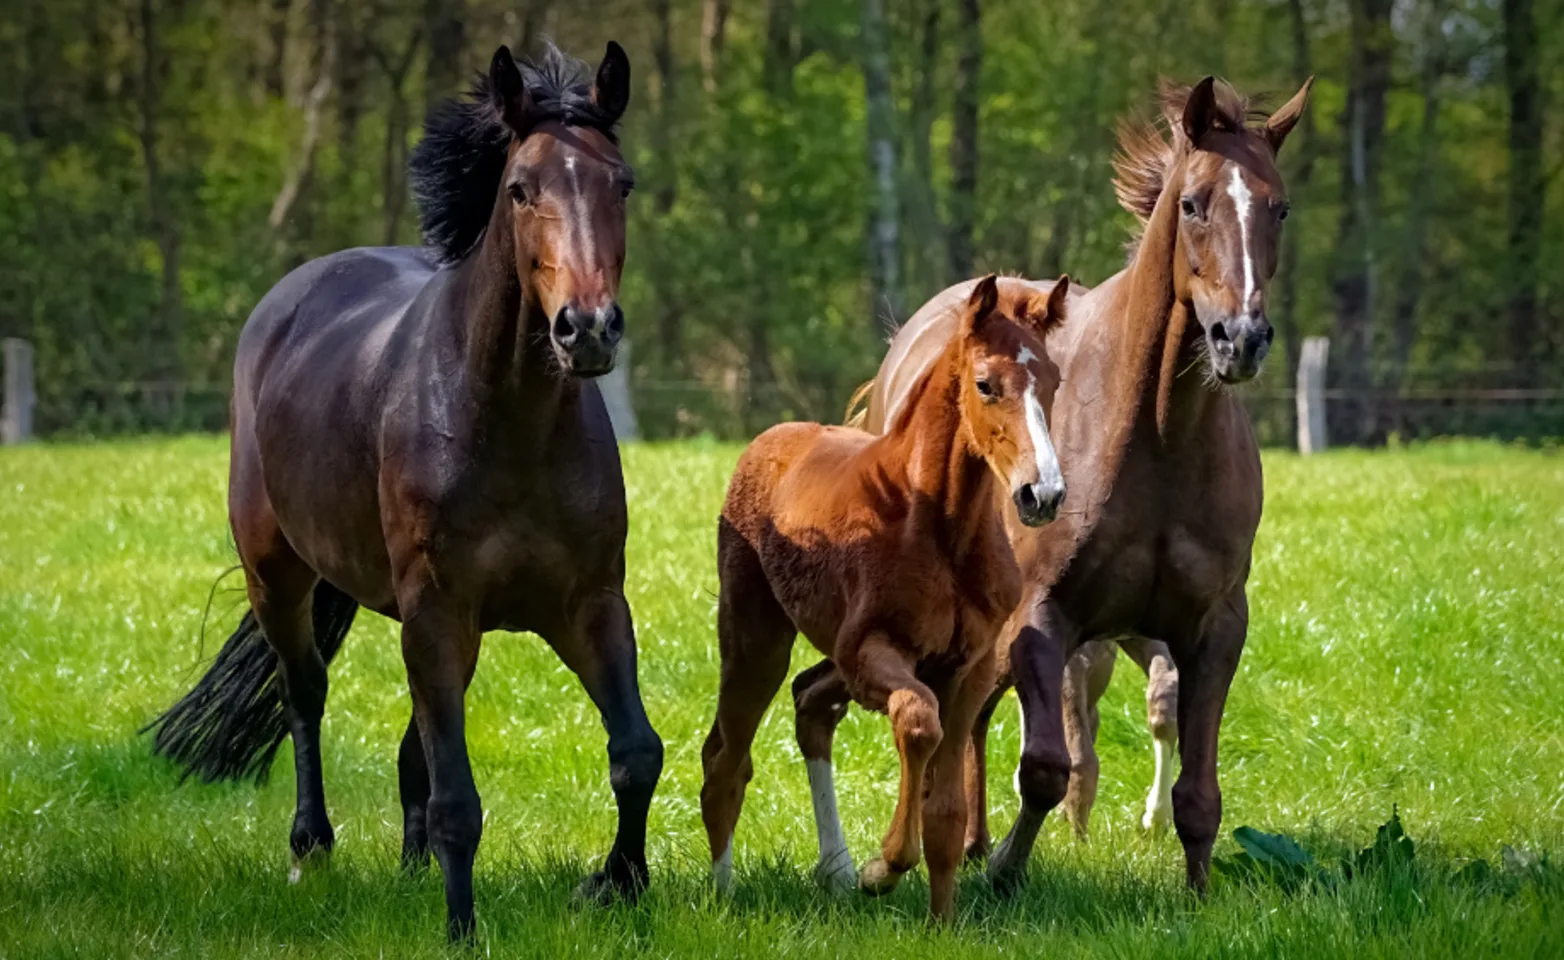 Mare, stallion, and foal running